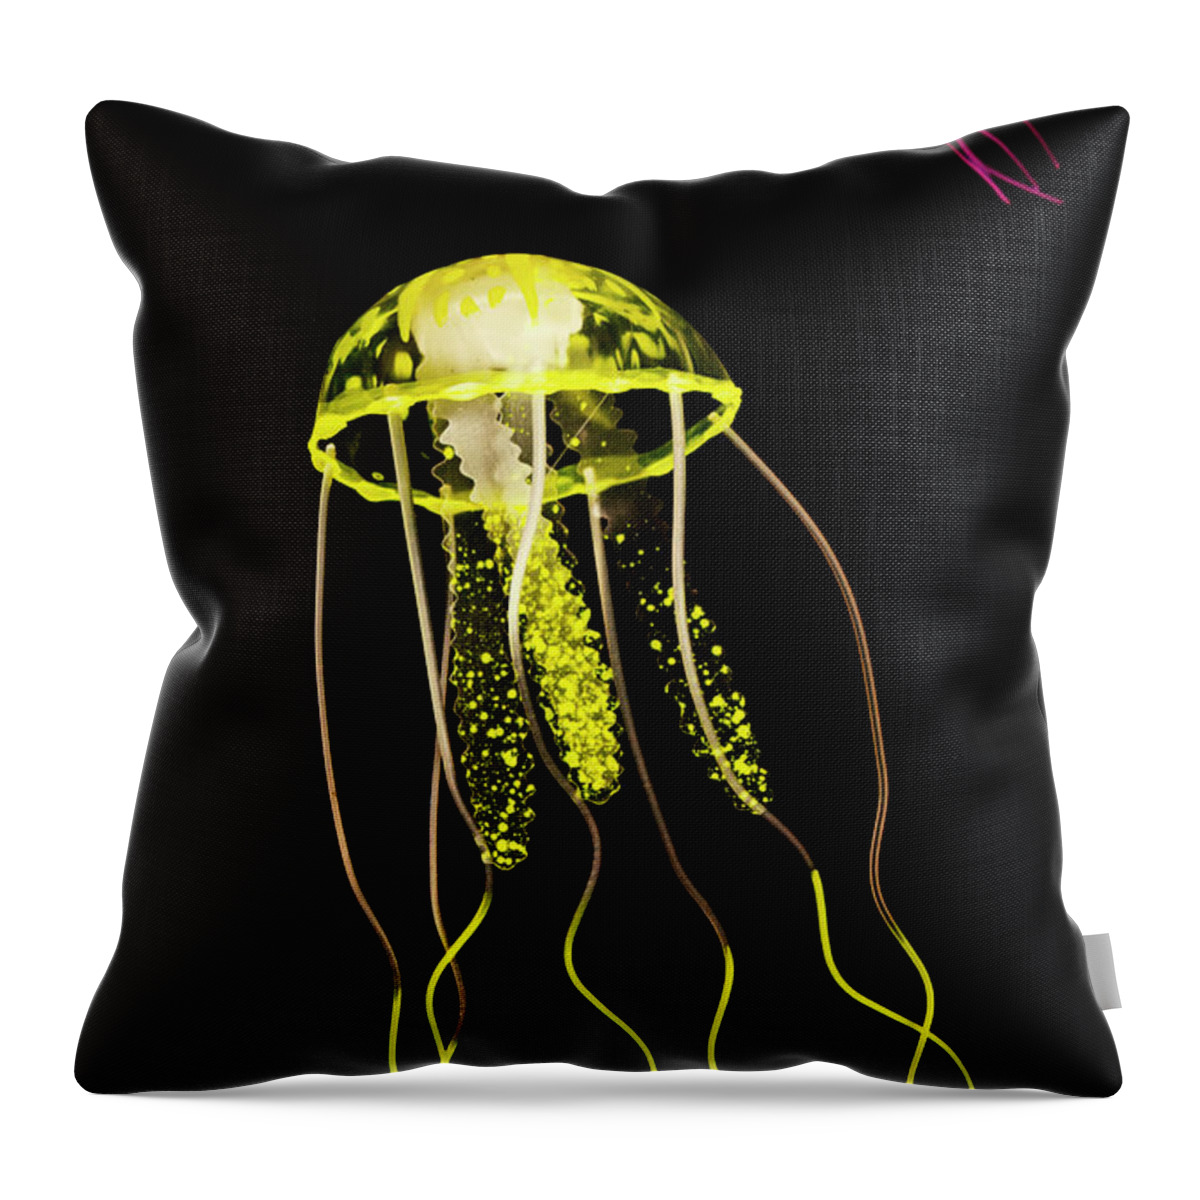 Underwater Throw Pillow featuring the photograph Flows of yellow marine life by Jorgo Photography